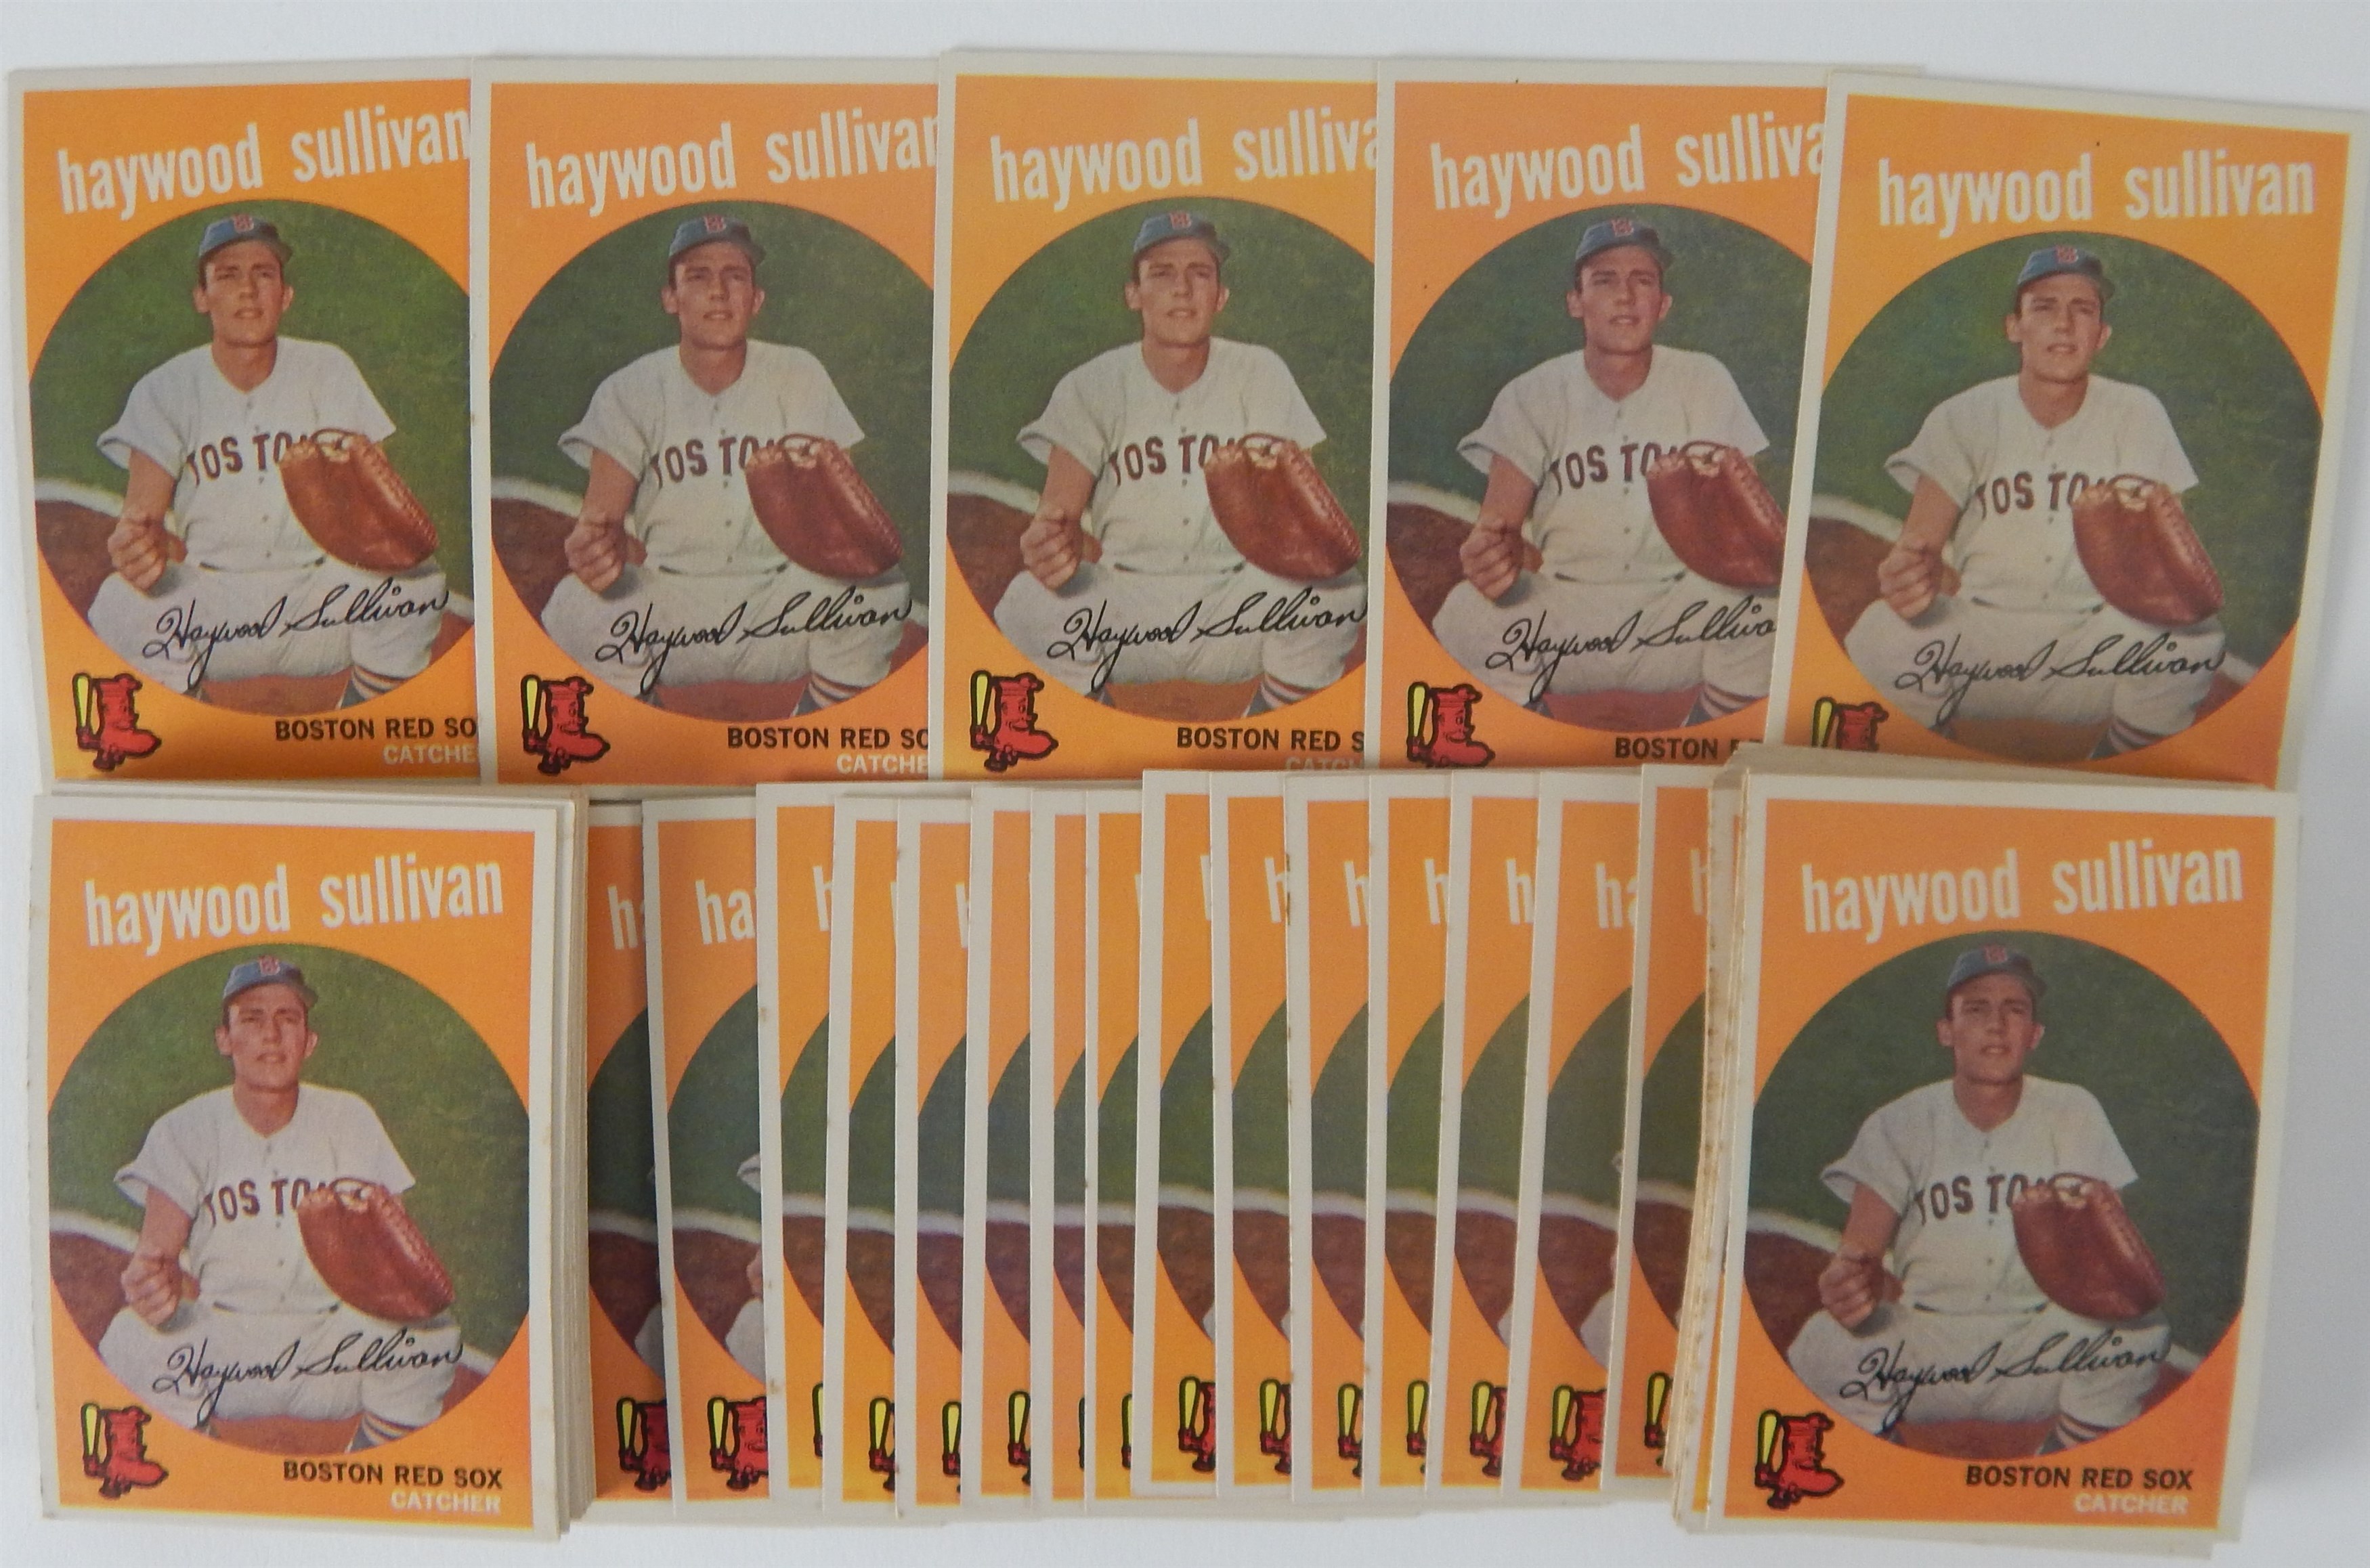 Baseball and Trading Cards - 1959 Topps #419 Haywood Sullivan Lot of 70